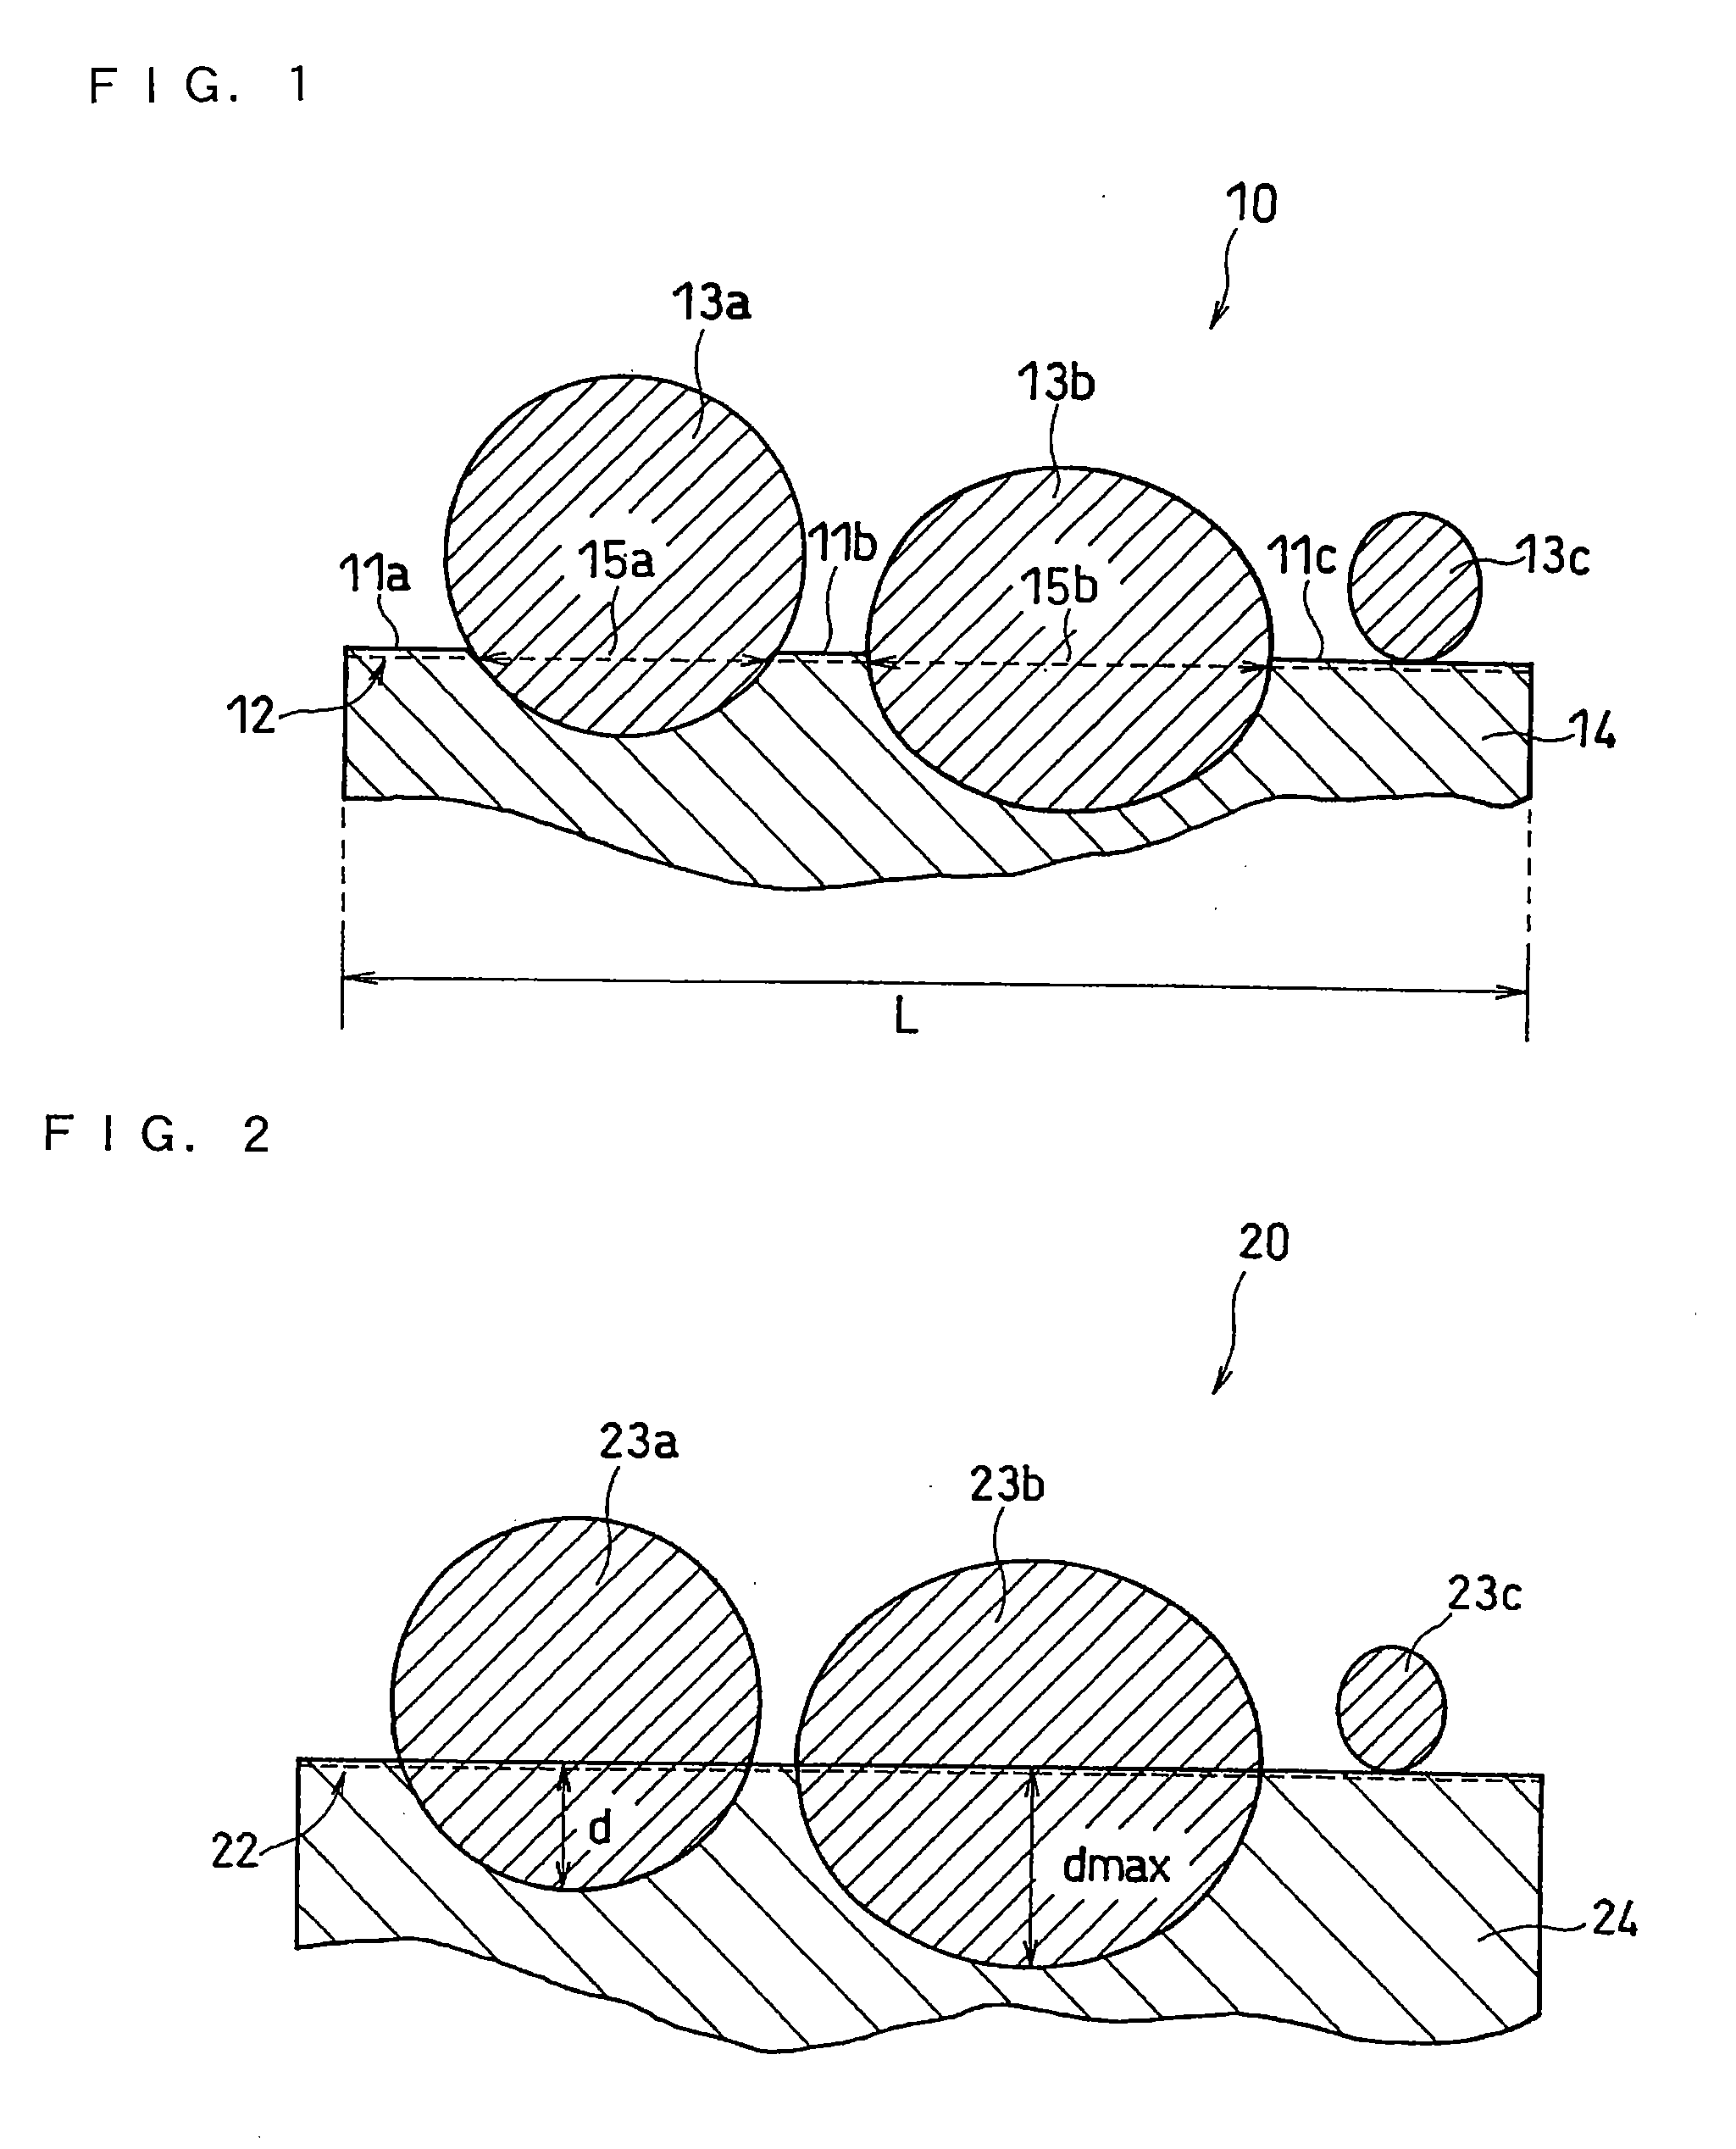 Electrode for lithium ion secondary battery